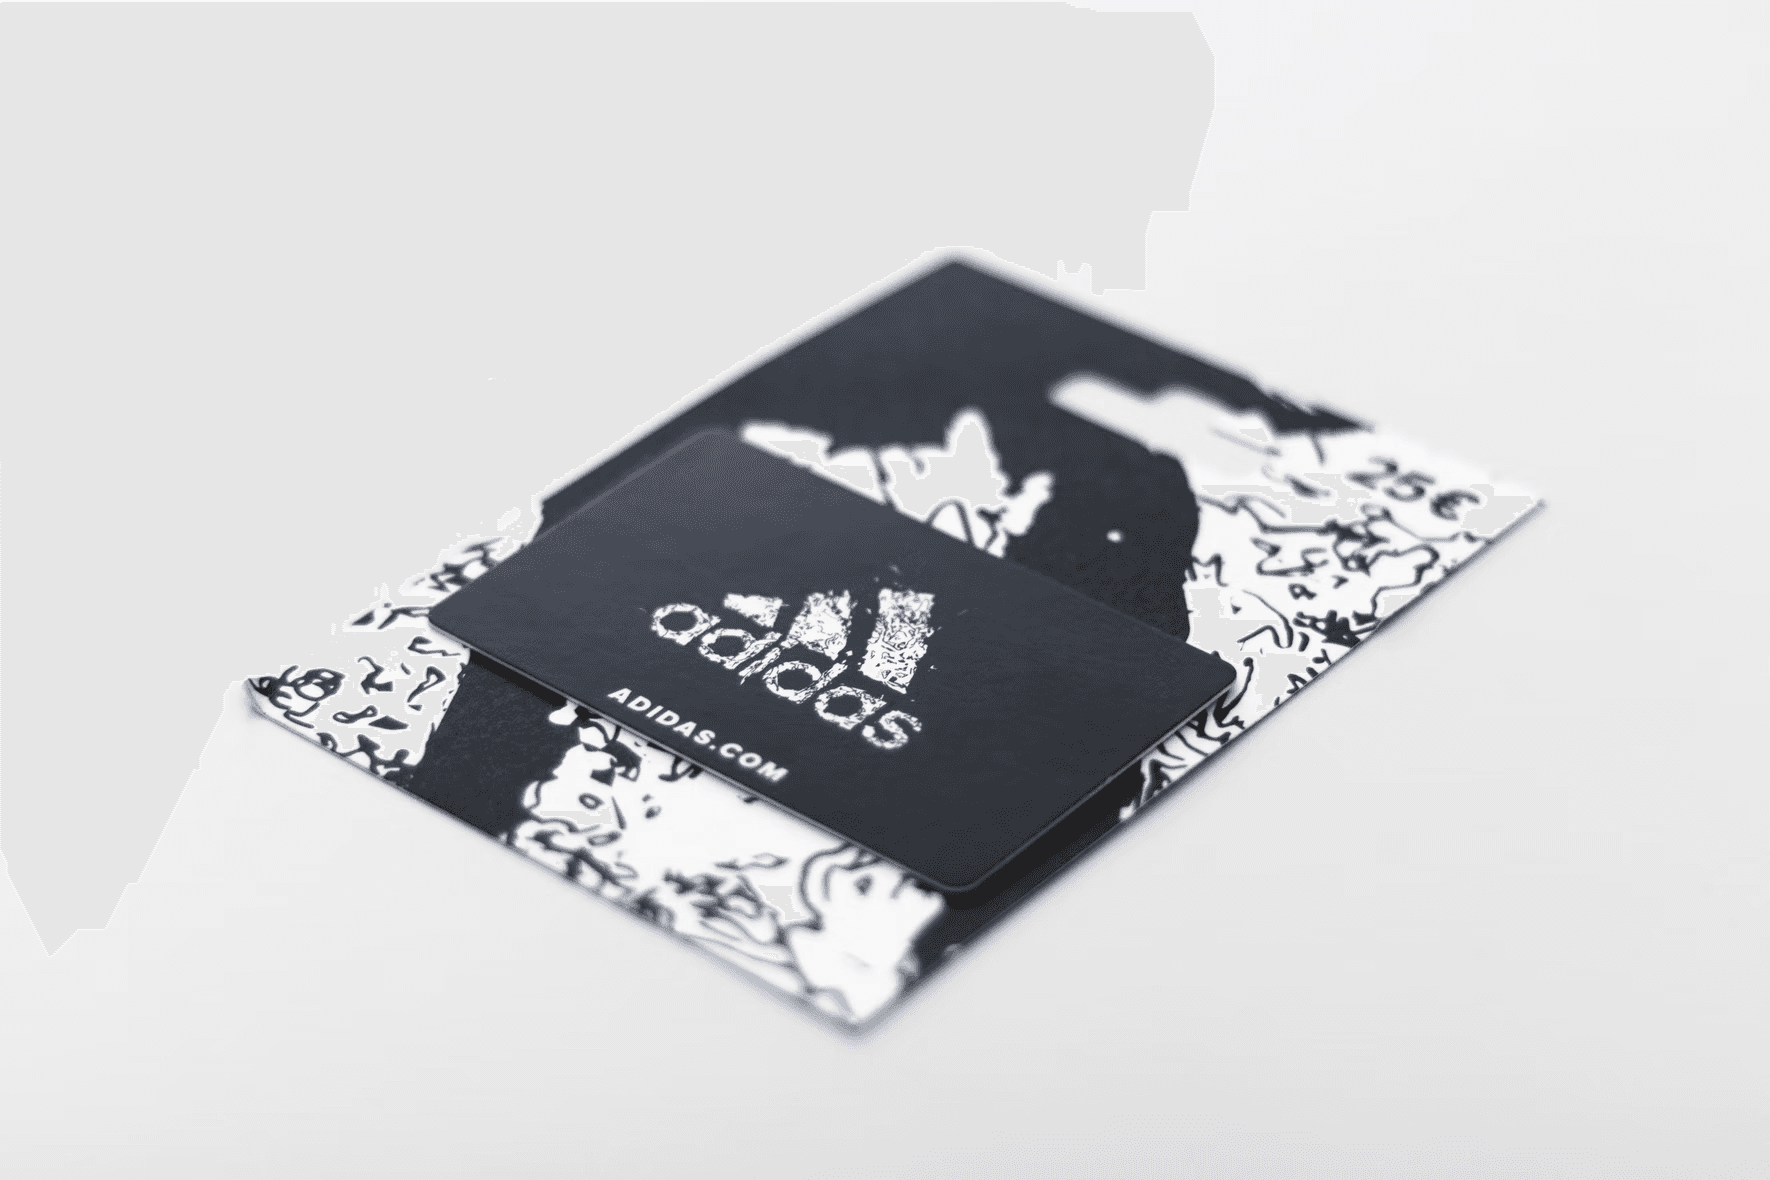 An Adidas gift card is laying against a white background.